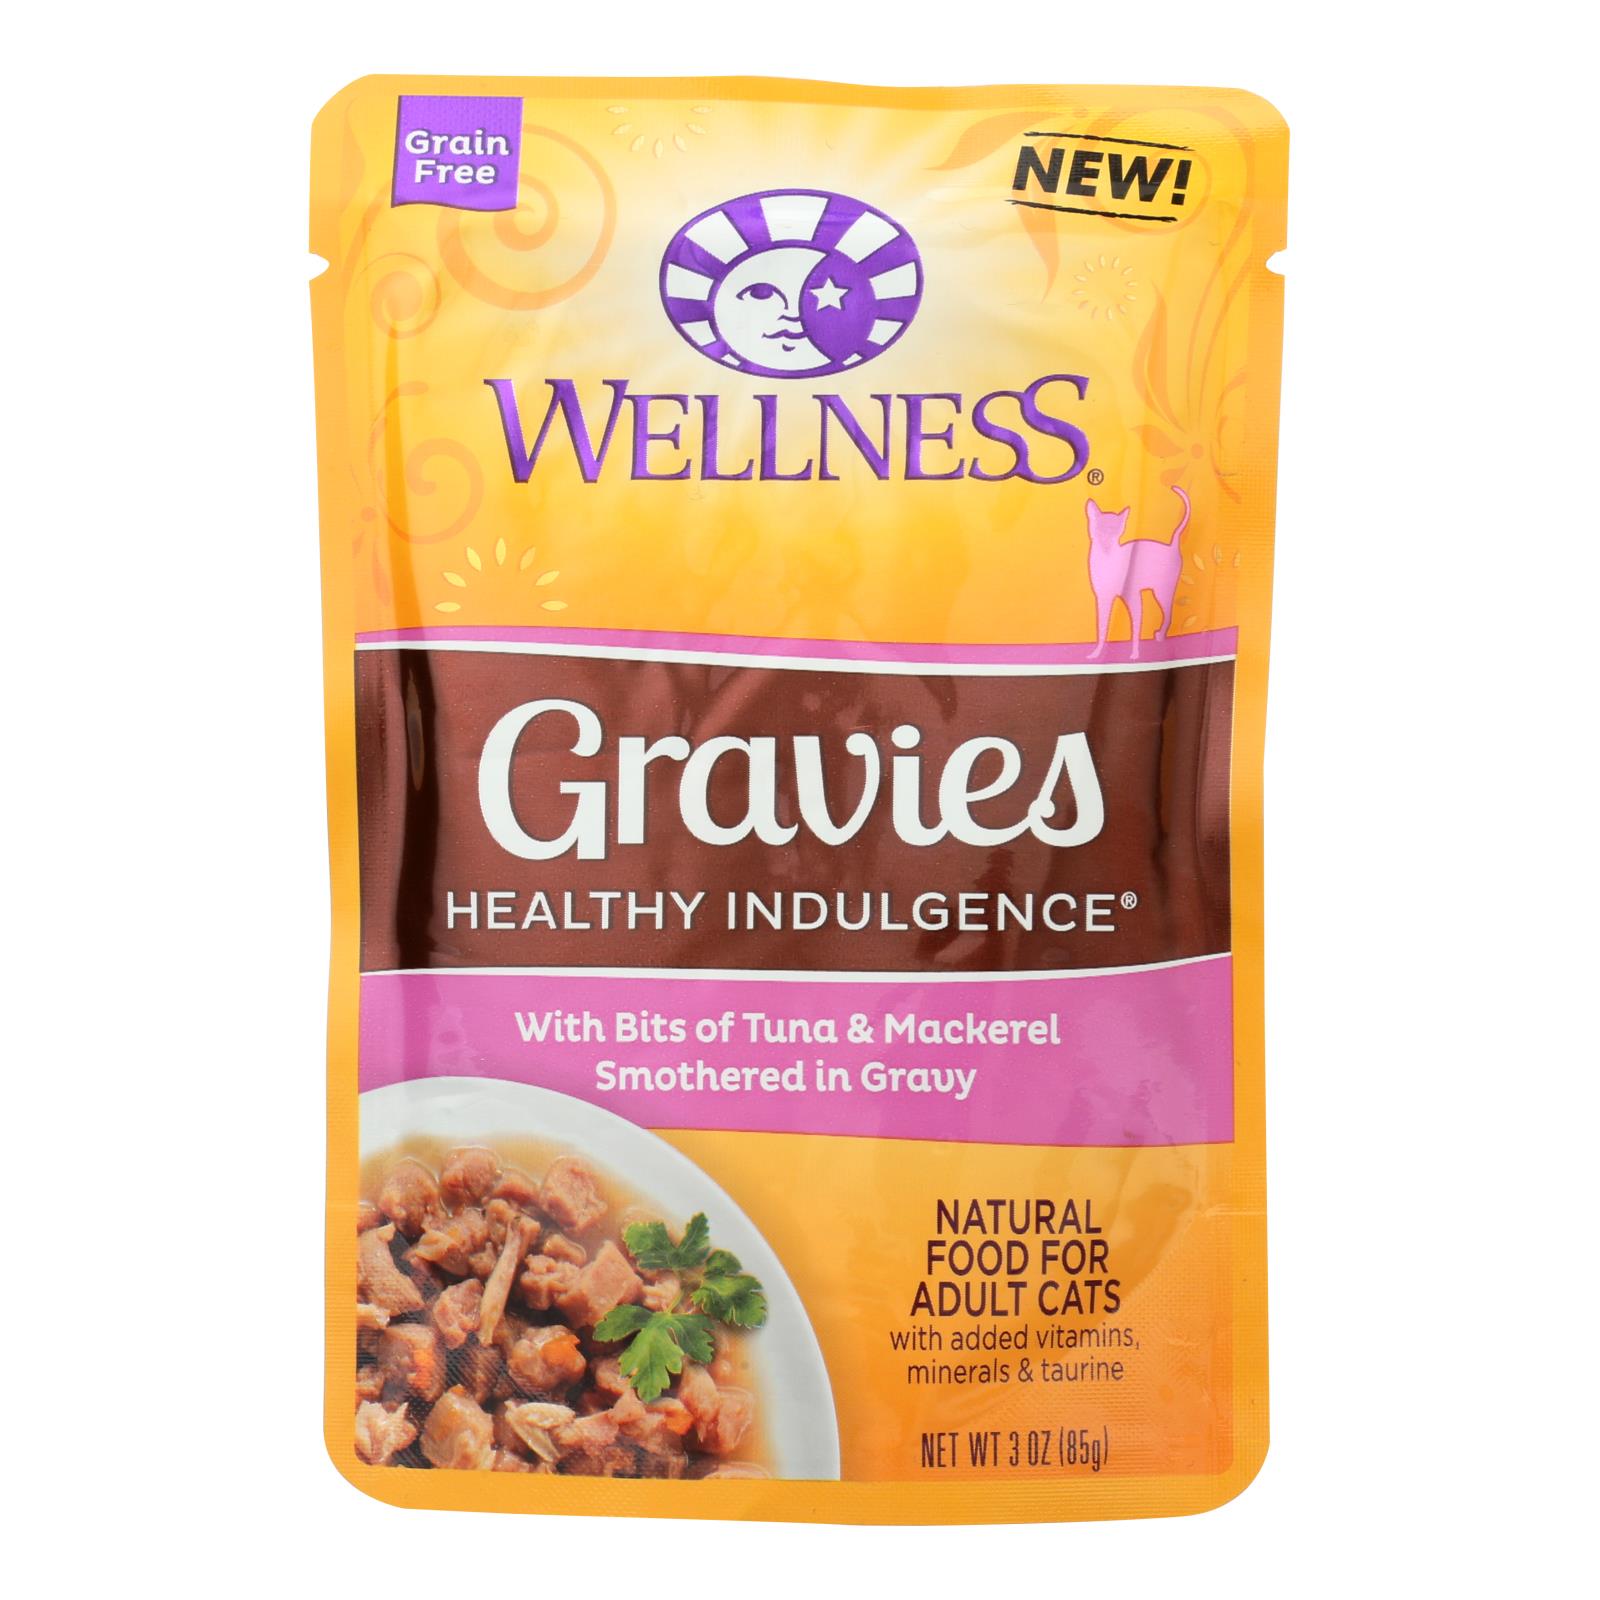 Wellness Pet Products Cat Food - Gravies With Bits Of Tuna And Mackerel Smothered In Gravy - Case Of 24 - 3 Oz.